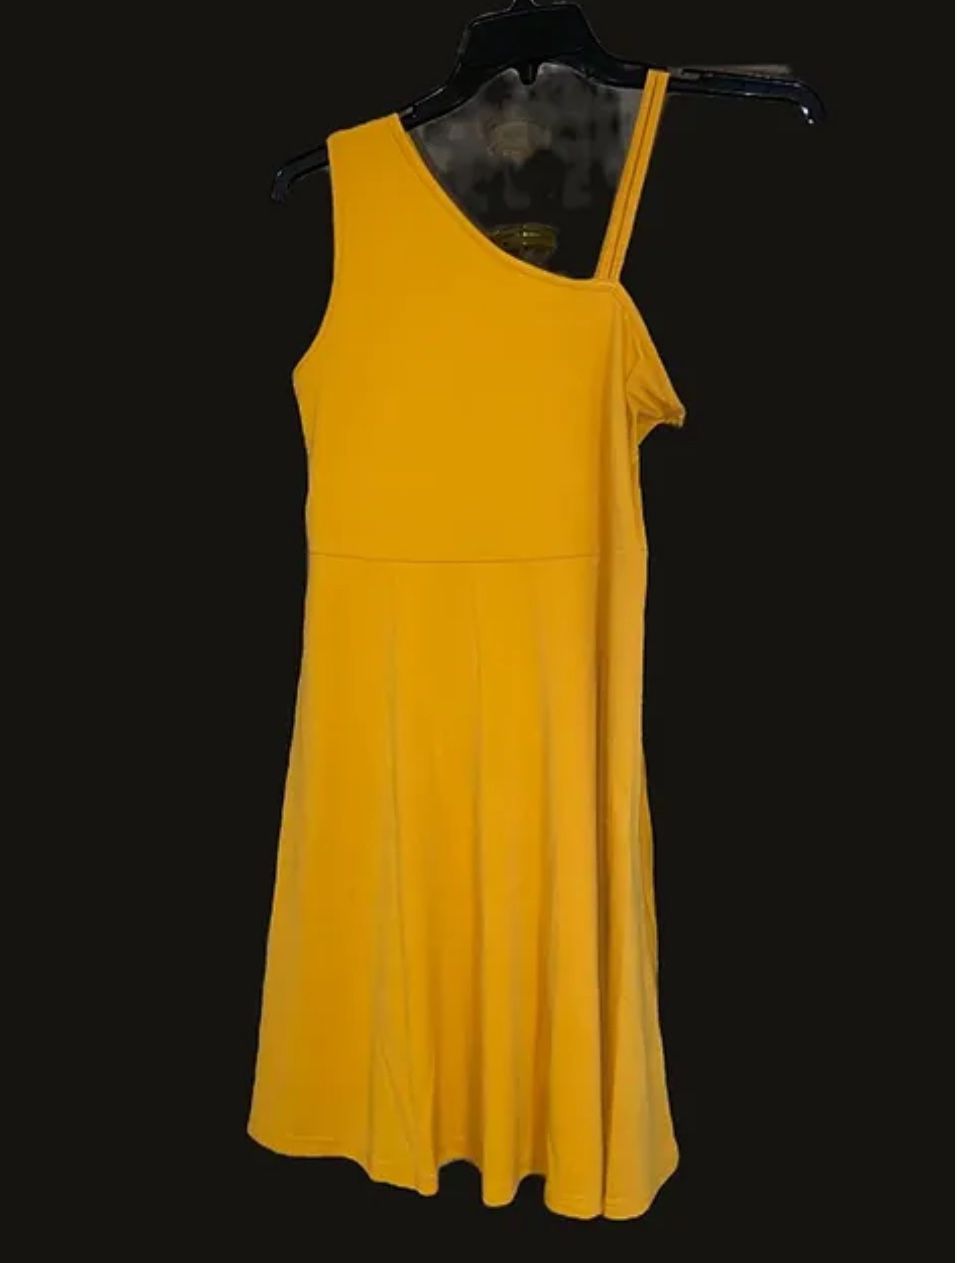 Brand New Size (Large) Mustard Yellow One Shoulder Dress A Line Swing Flared Skater Cocktail Mini Dress